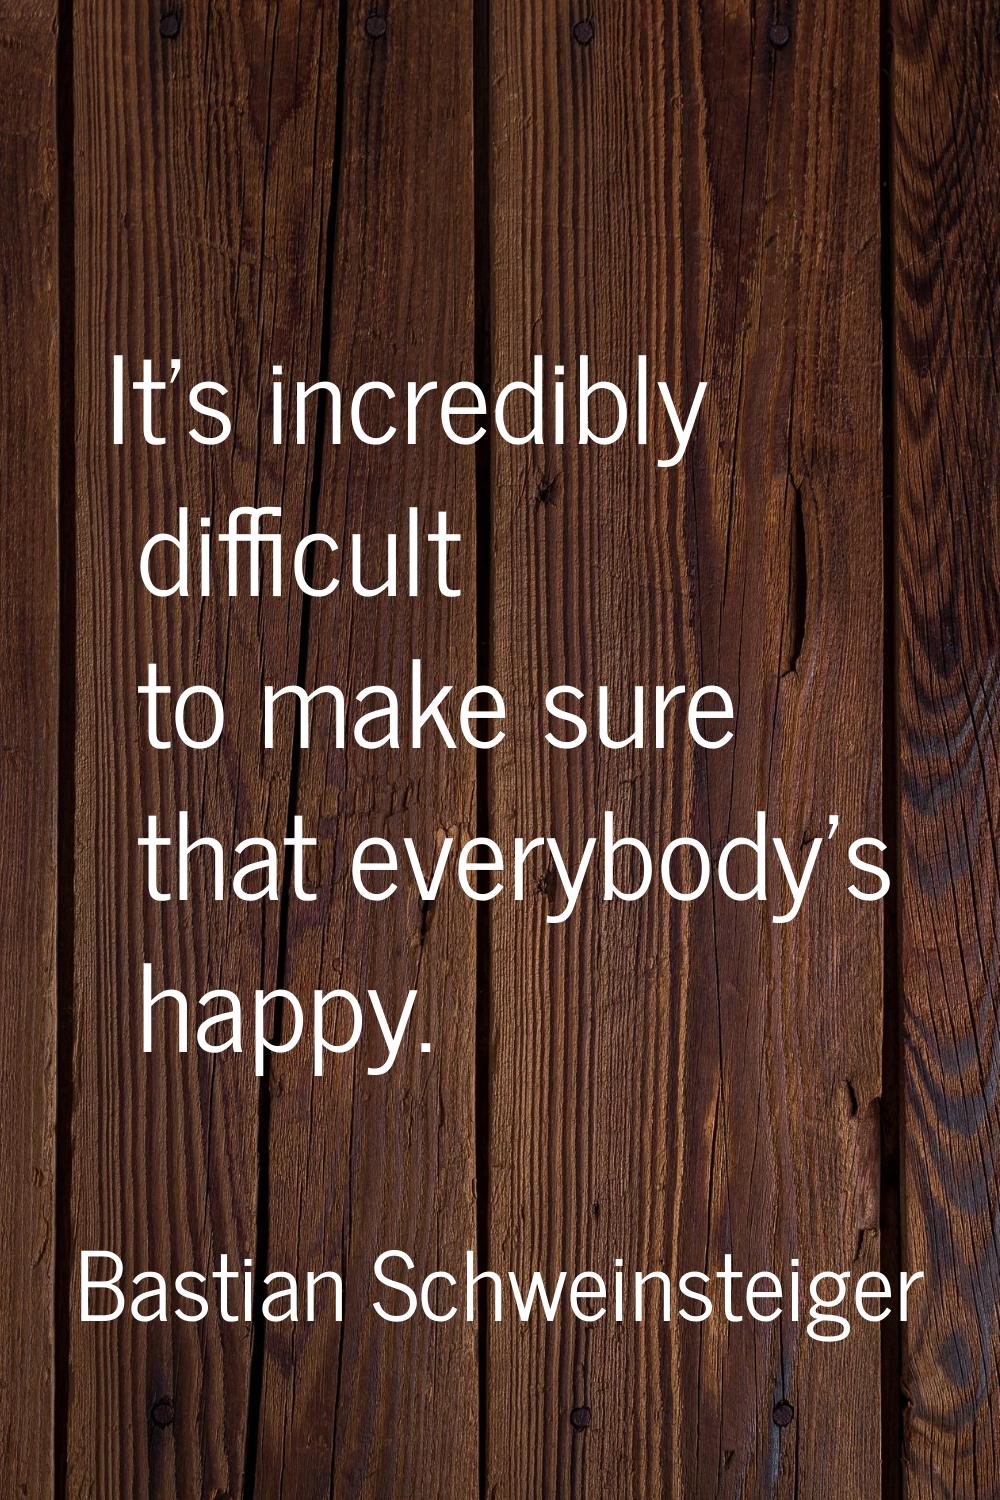 It's incredibly difficult to make sure that everybody's happy.